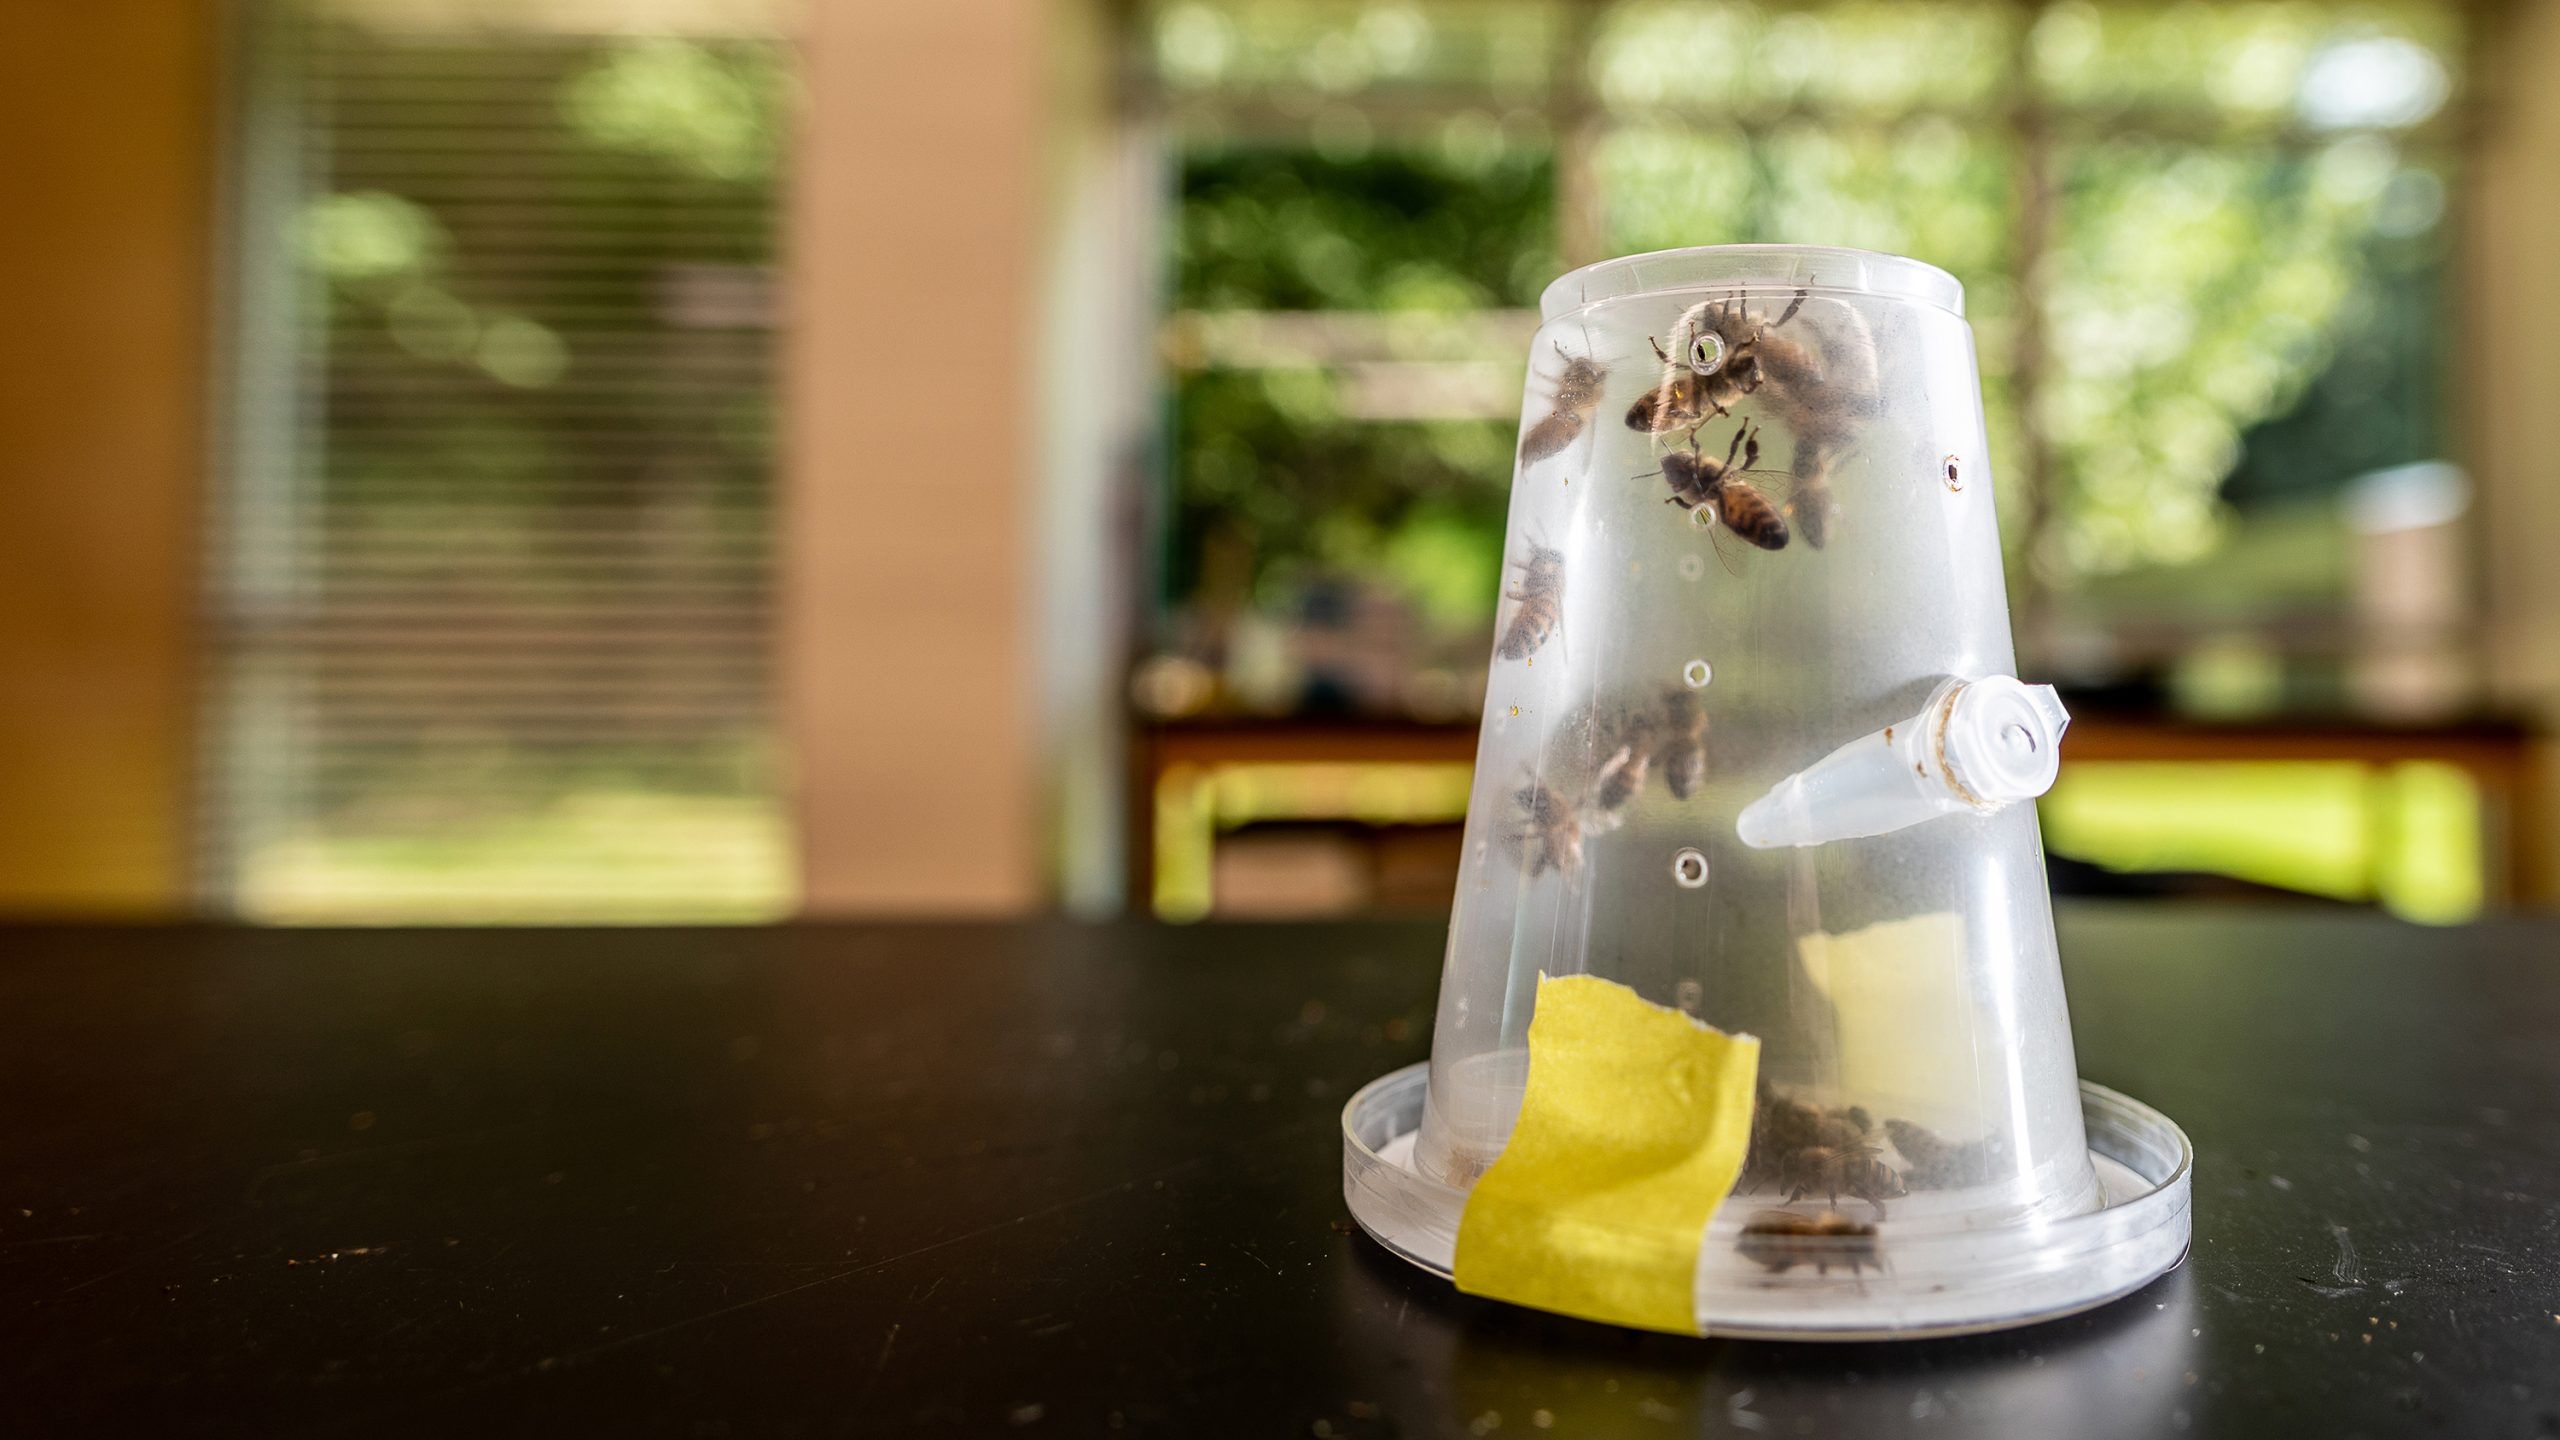 A modified, transparent plastic cup containing bees